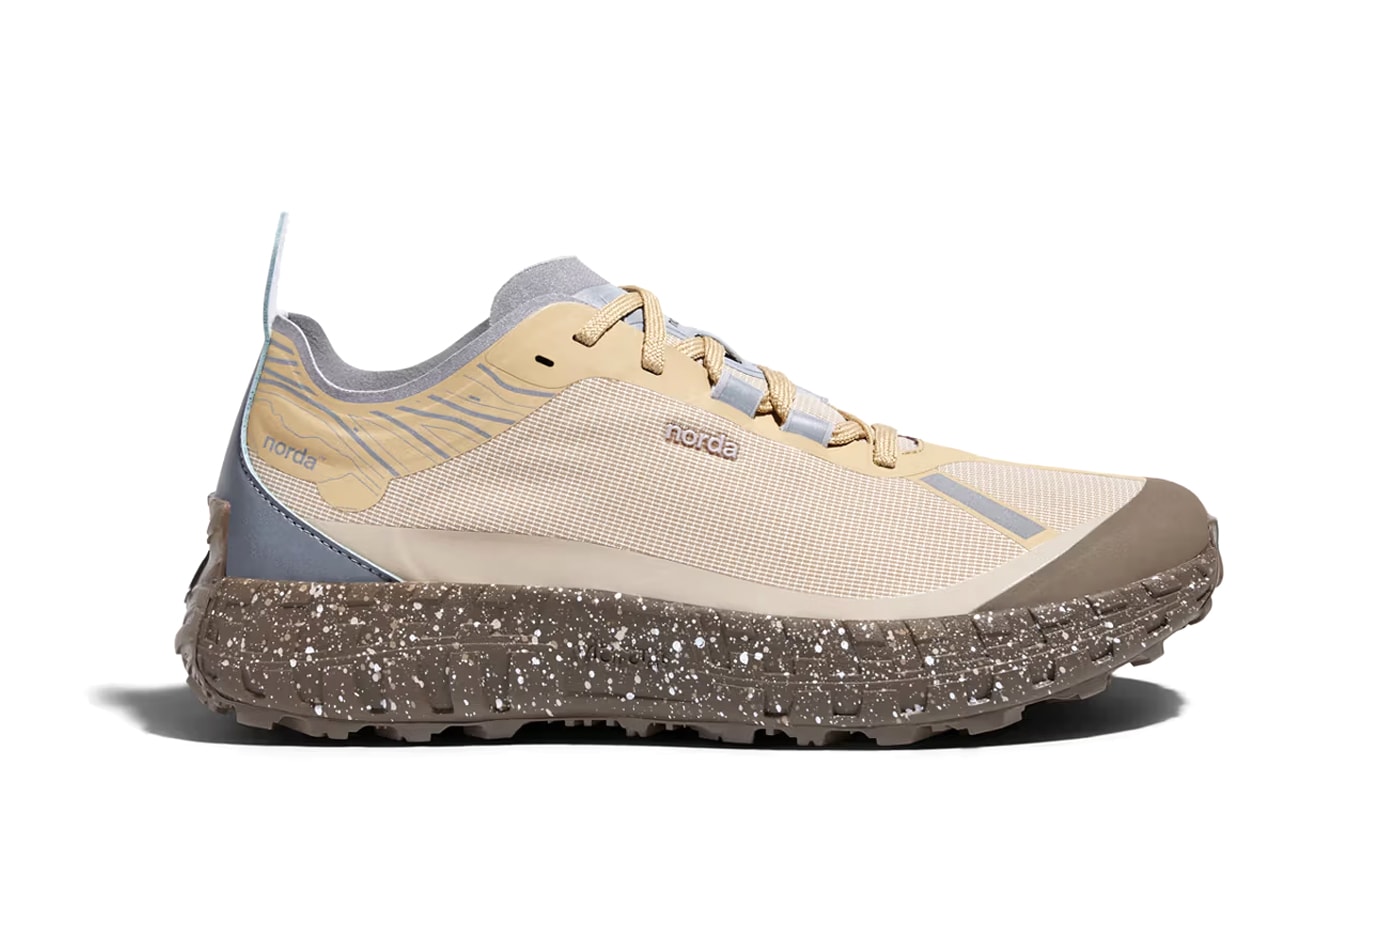 norda 001 trail running shoes regolith mars vibram dyneema fw23 official release date info photos price store list buying guide